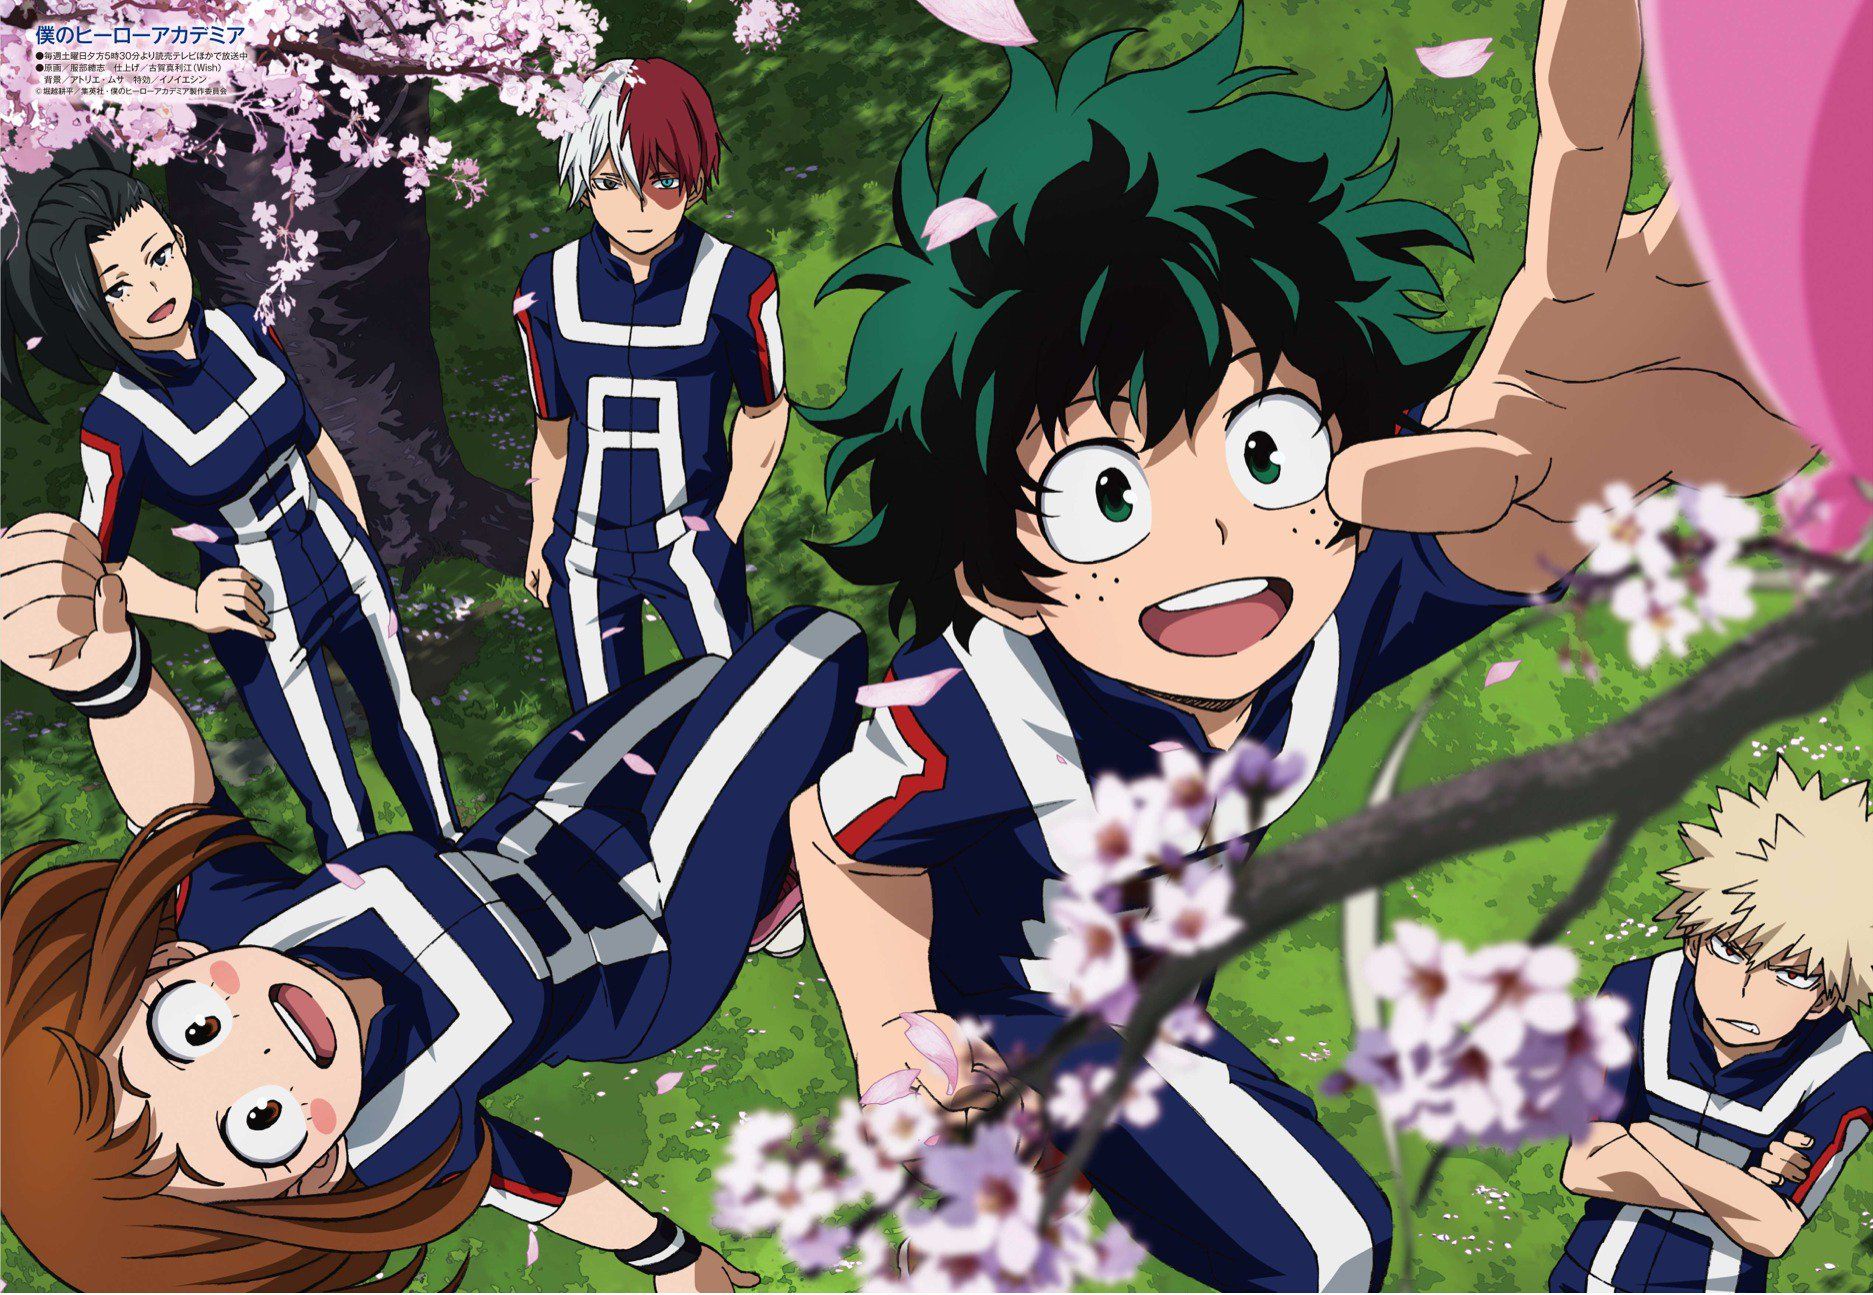 A collage of My Hero Academia characters amid cherry blossoms.